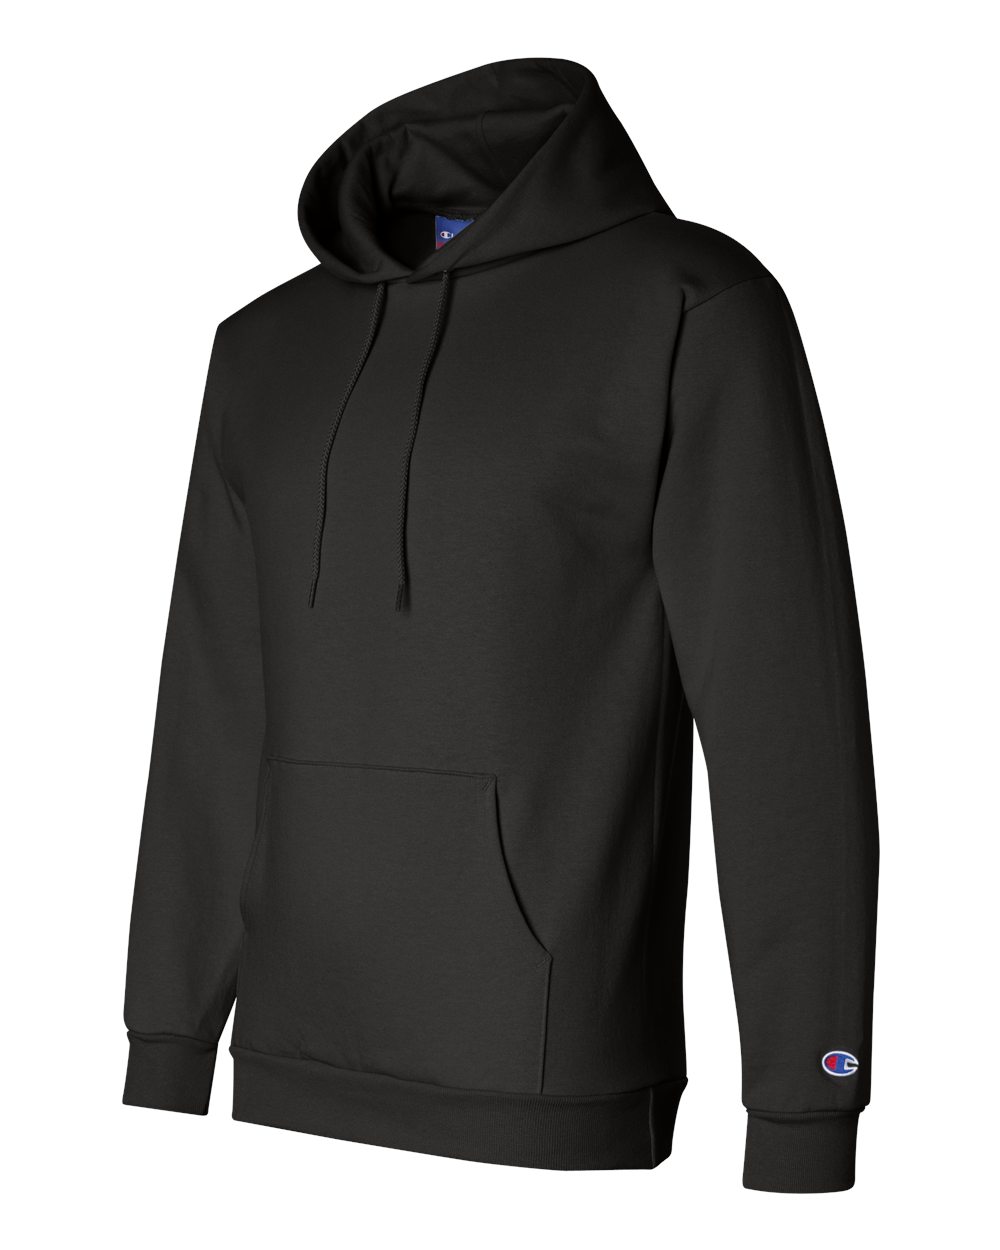 fully customizable champion power blend hoodie pullover sweater for your brand in multiple colors